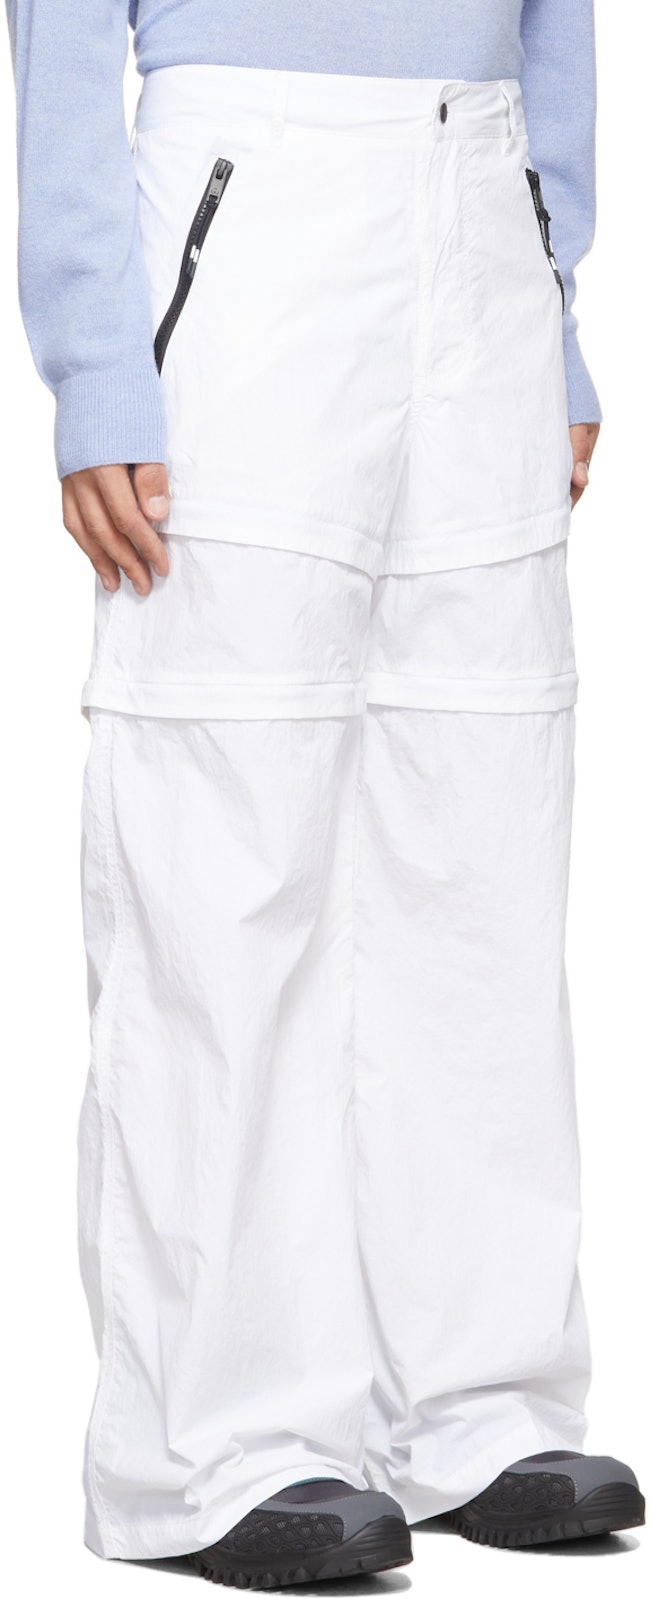 White Convertible Pants: additional image